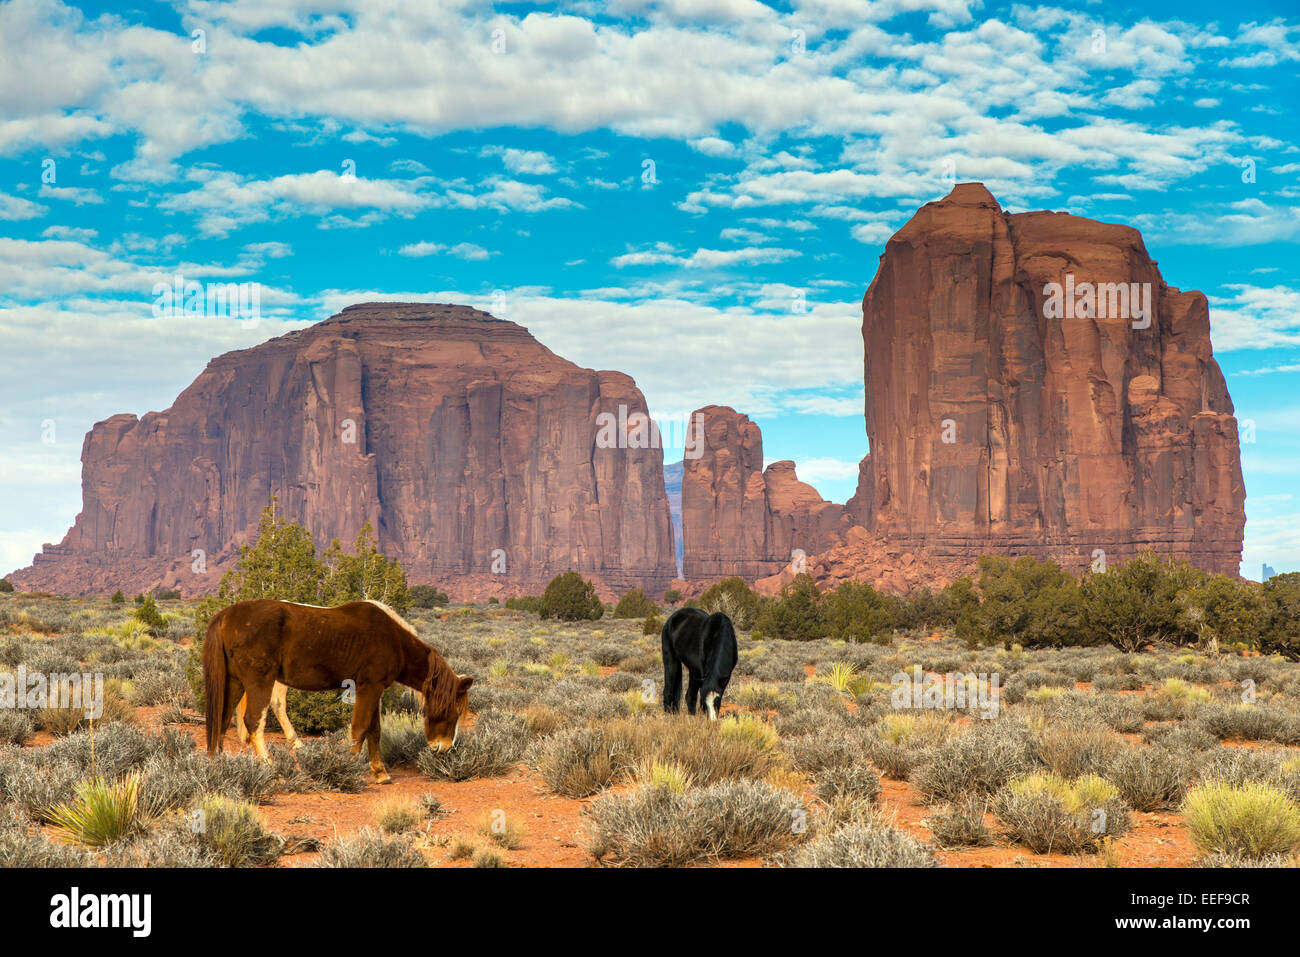 Horses grazing with buttes behind, Monument Valley Navajo Tribal Park, Arizona, USA Stock Photo